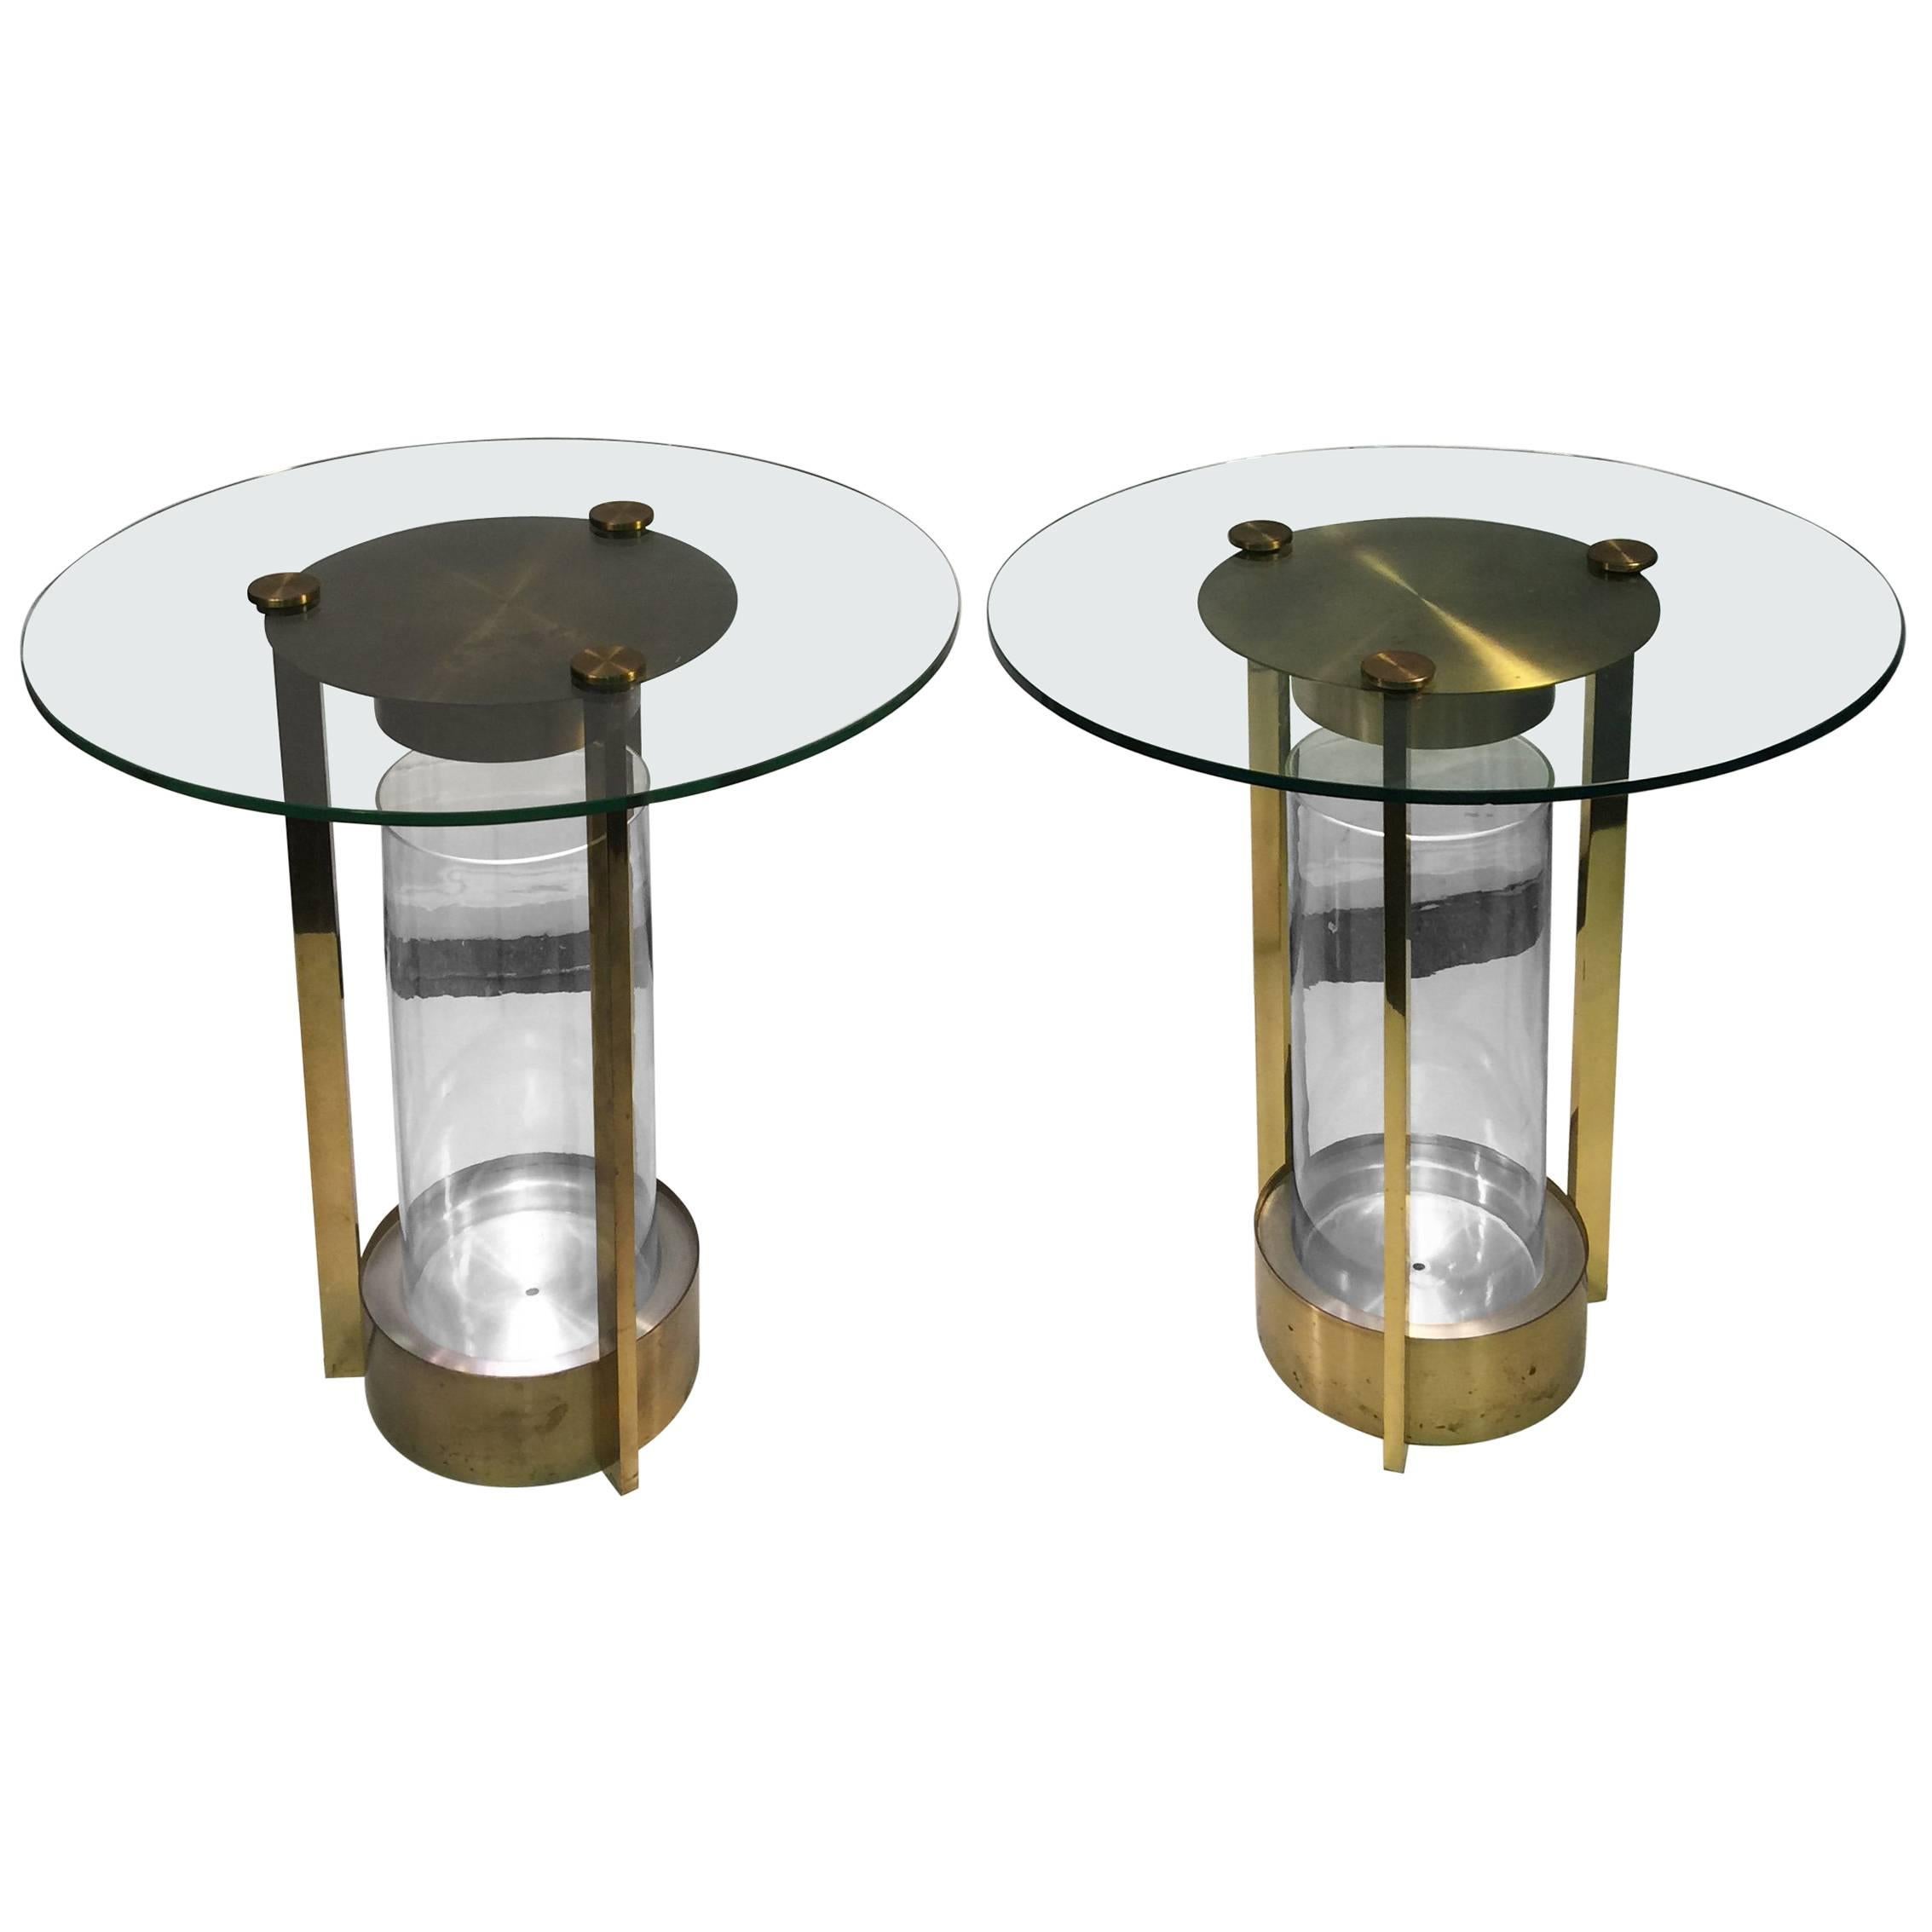 Pair of Dorothy Thorpe Modernist Art Deco Illumunated Brass Tables For Sale